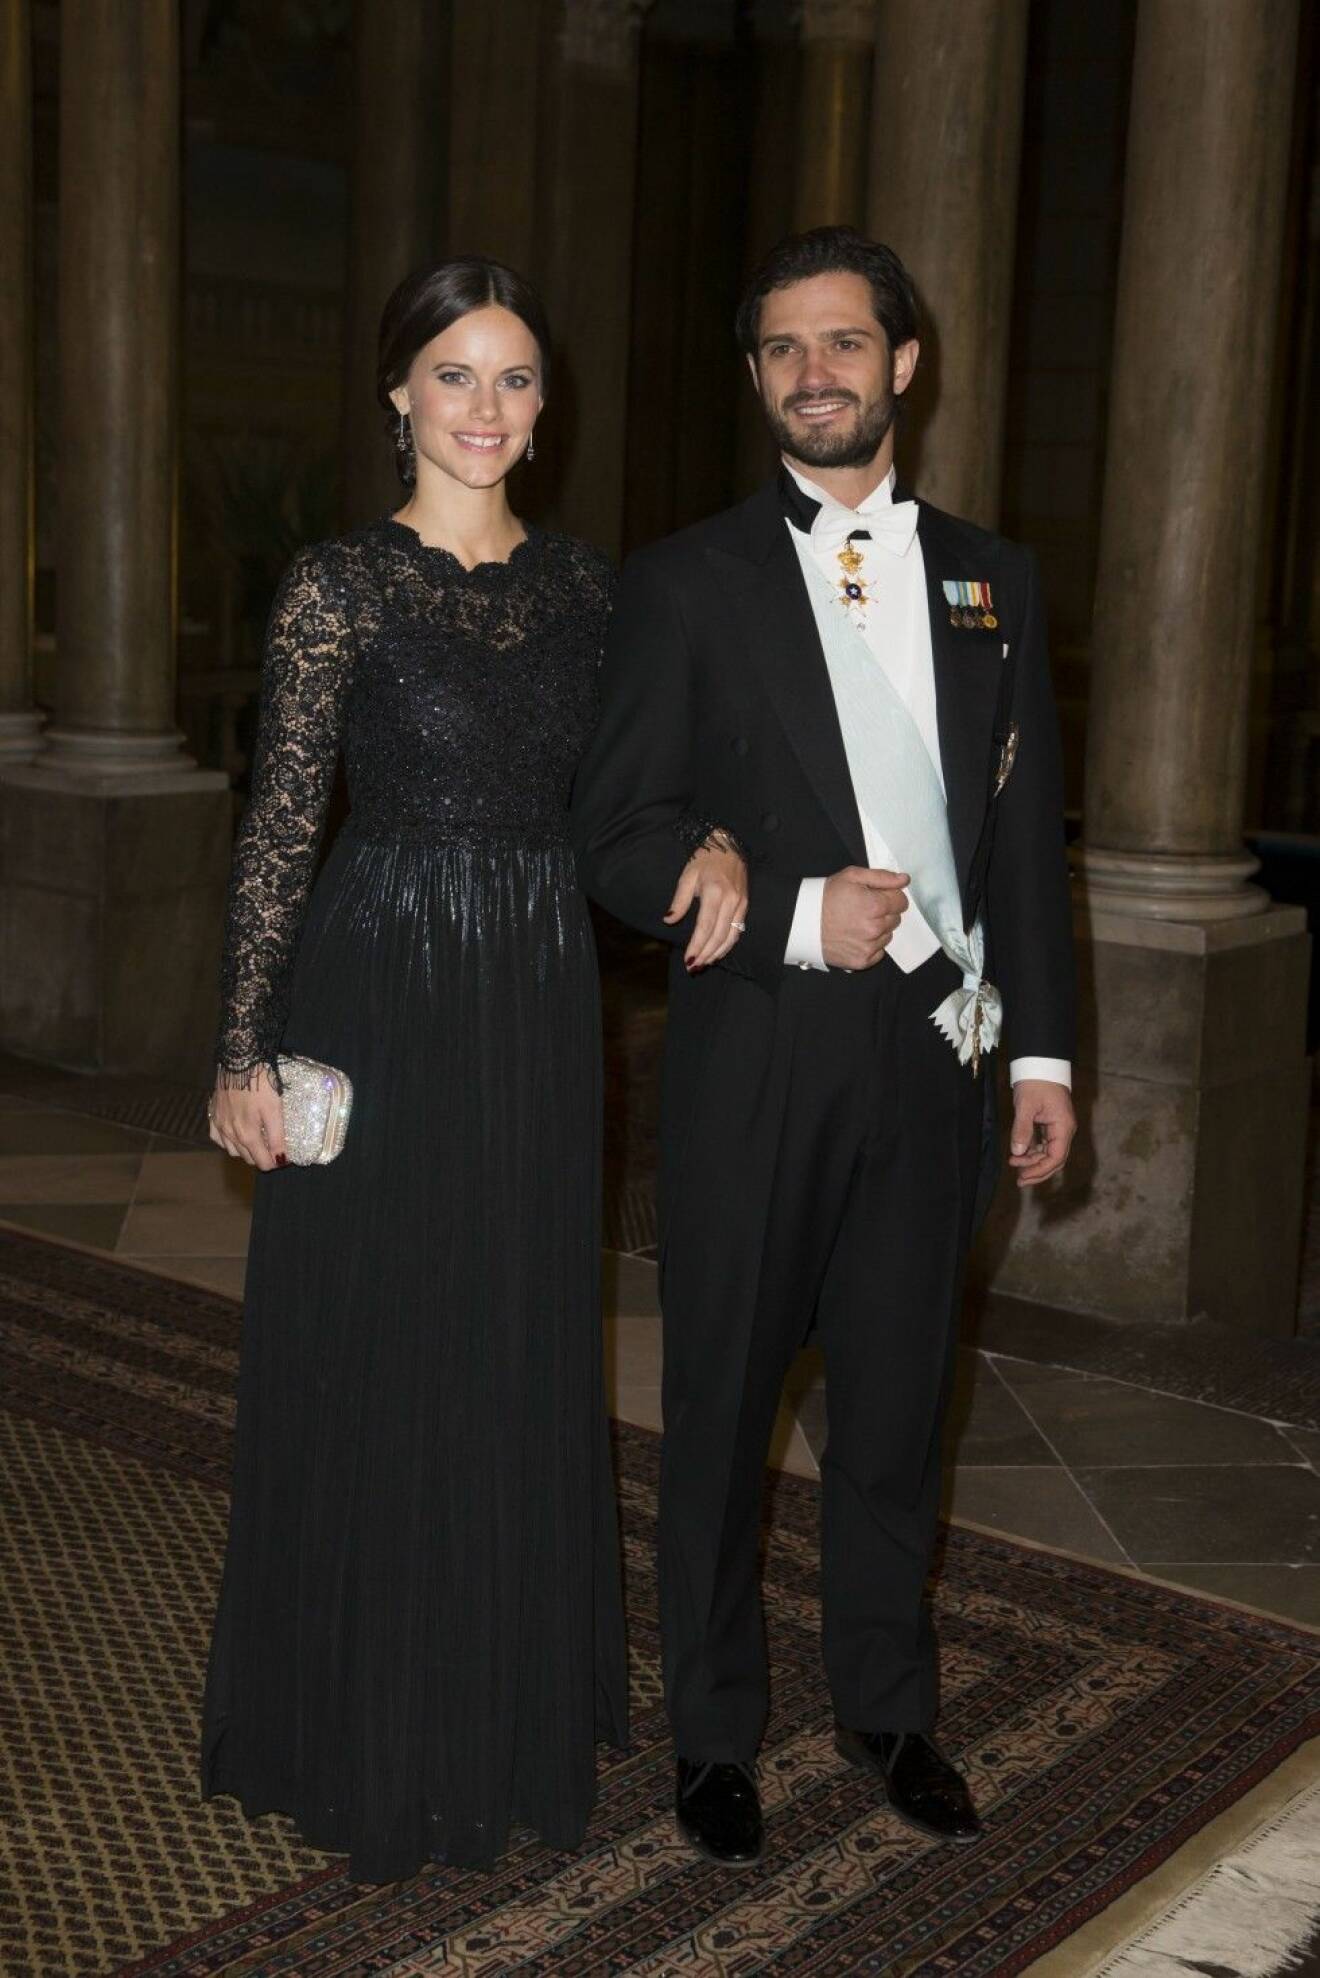 Official dinner at Royal Palace in Stockholm